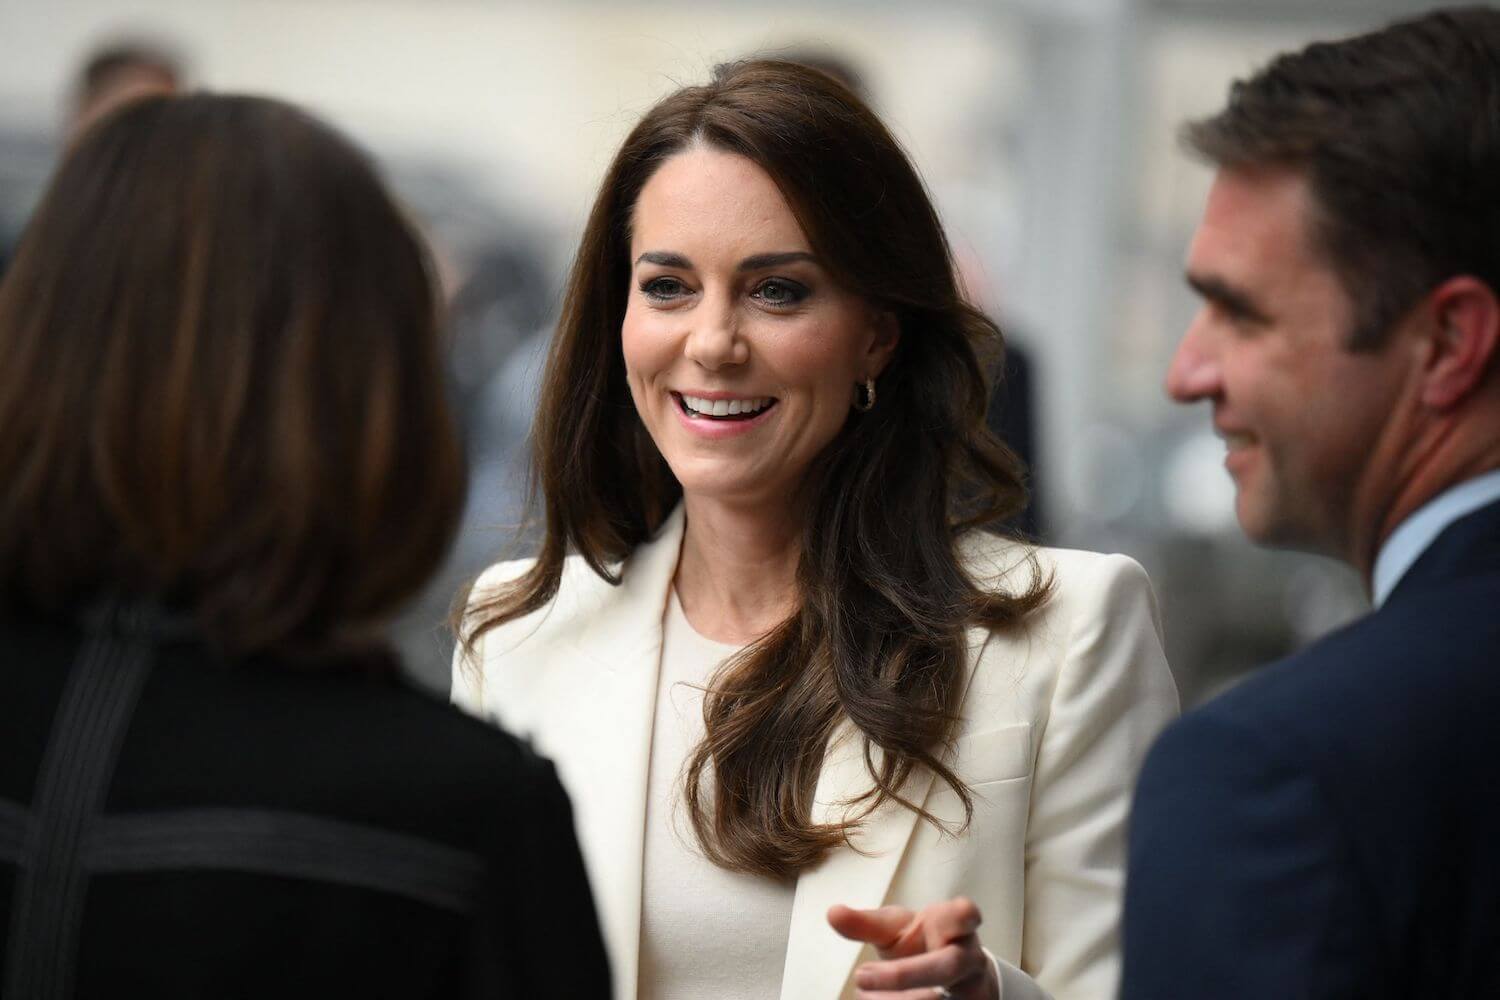 Kate Middleton smiles wearing a white suit jacket while talking with people